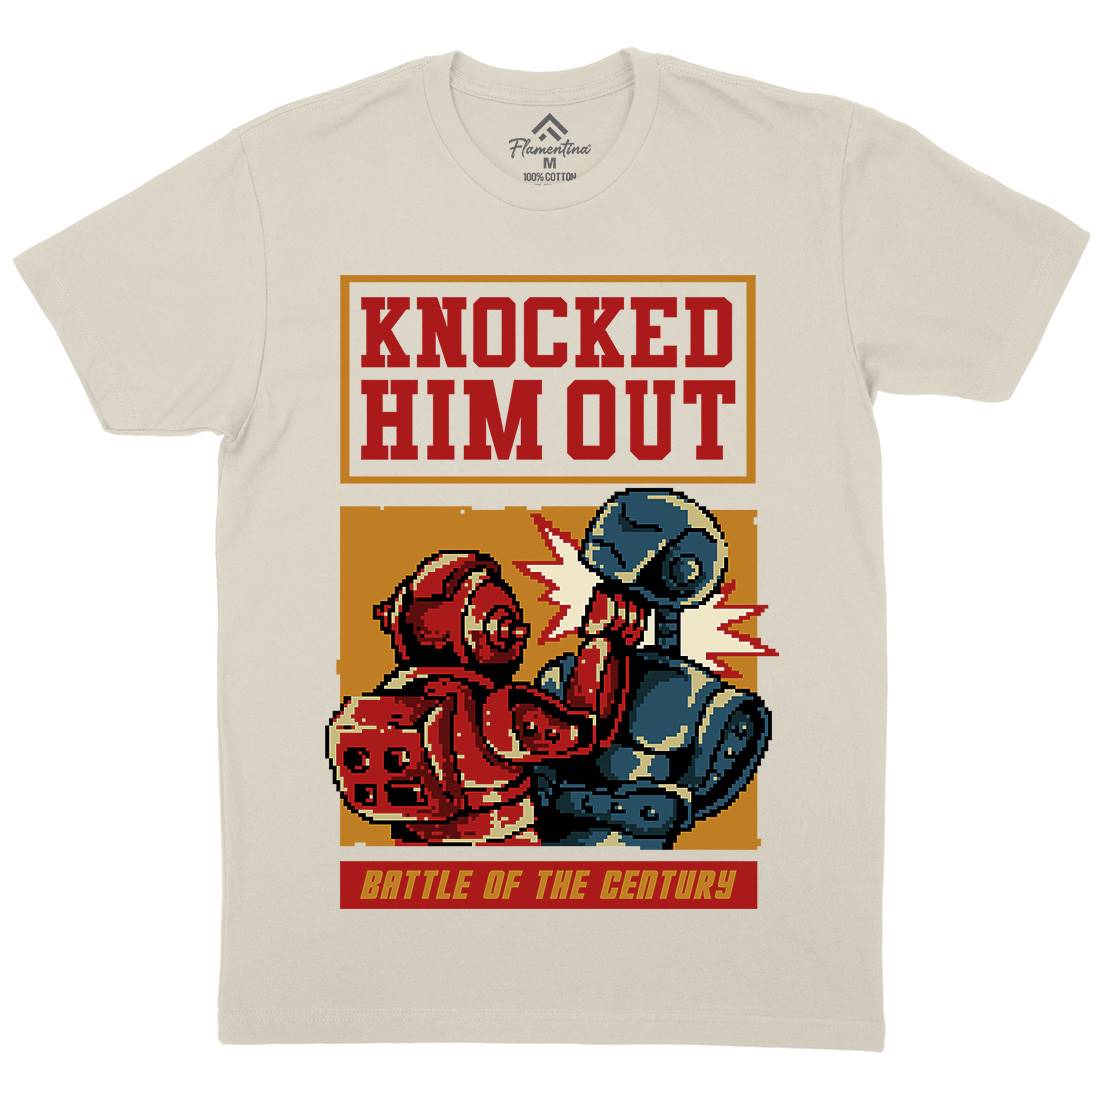 Knocked Him Out Mens Organic Crew Neck T-Shirt Space B923